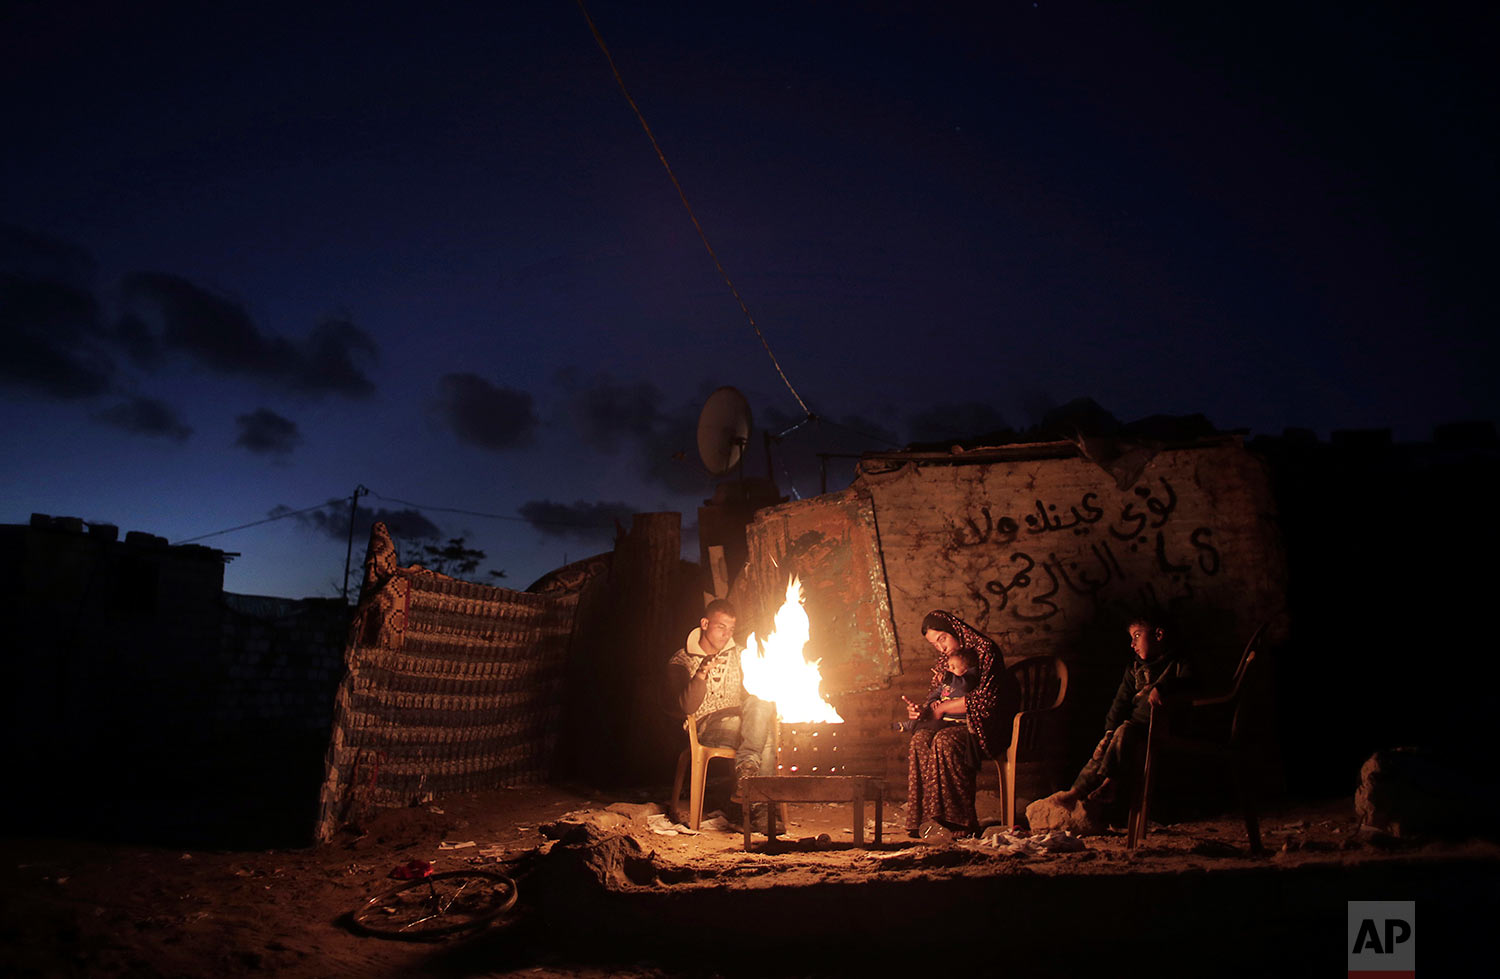  In this Jan. 15, 2017 photo, a Palestinian family warm themselves with a fire outside their makeshift house during a power cut in a poor neighborhood in Khan Younis, the southern Gaza Strip. (AP Photo/Khalil Hamra) 